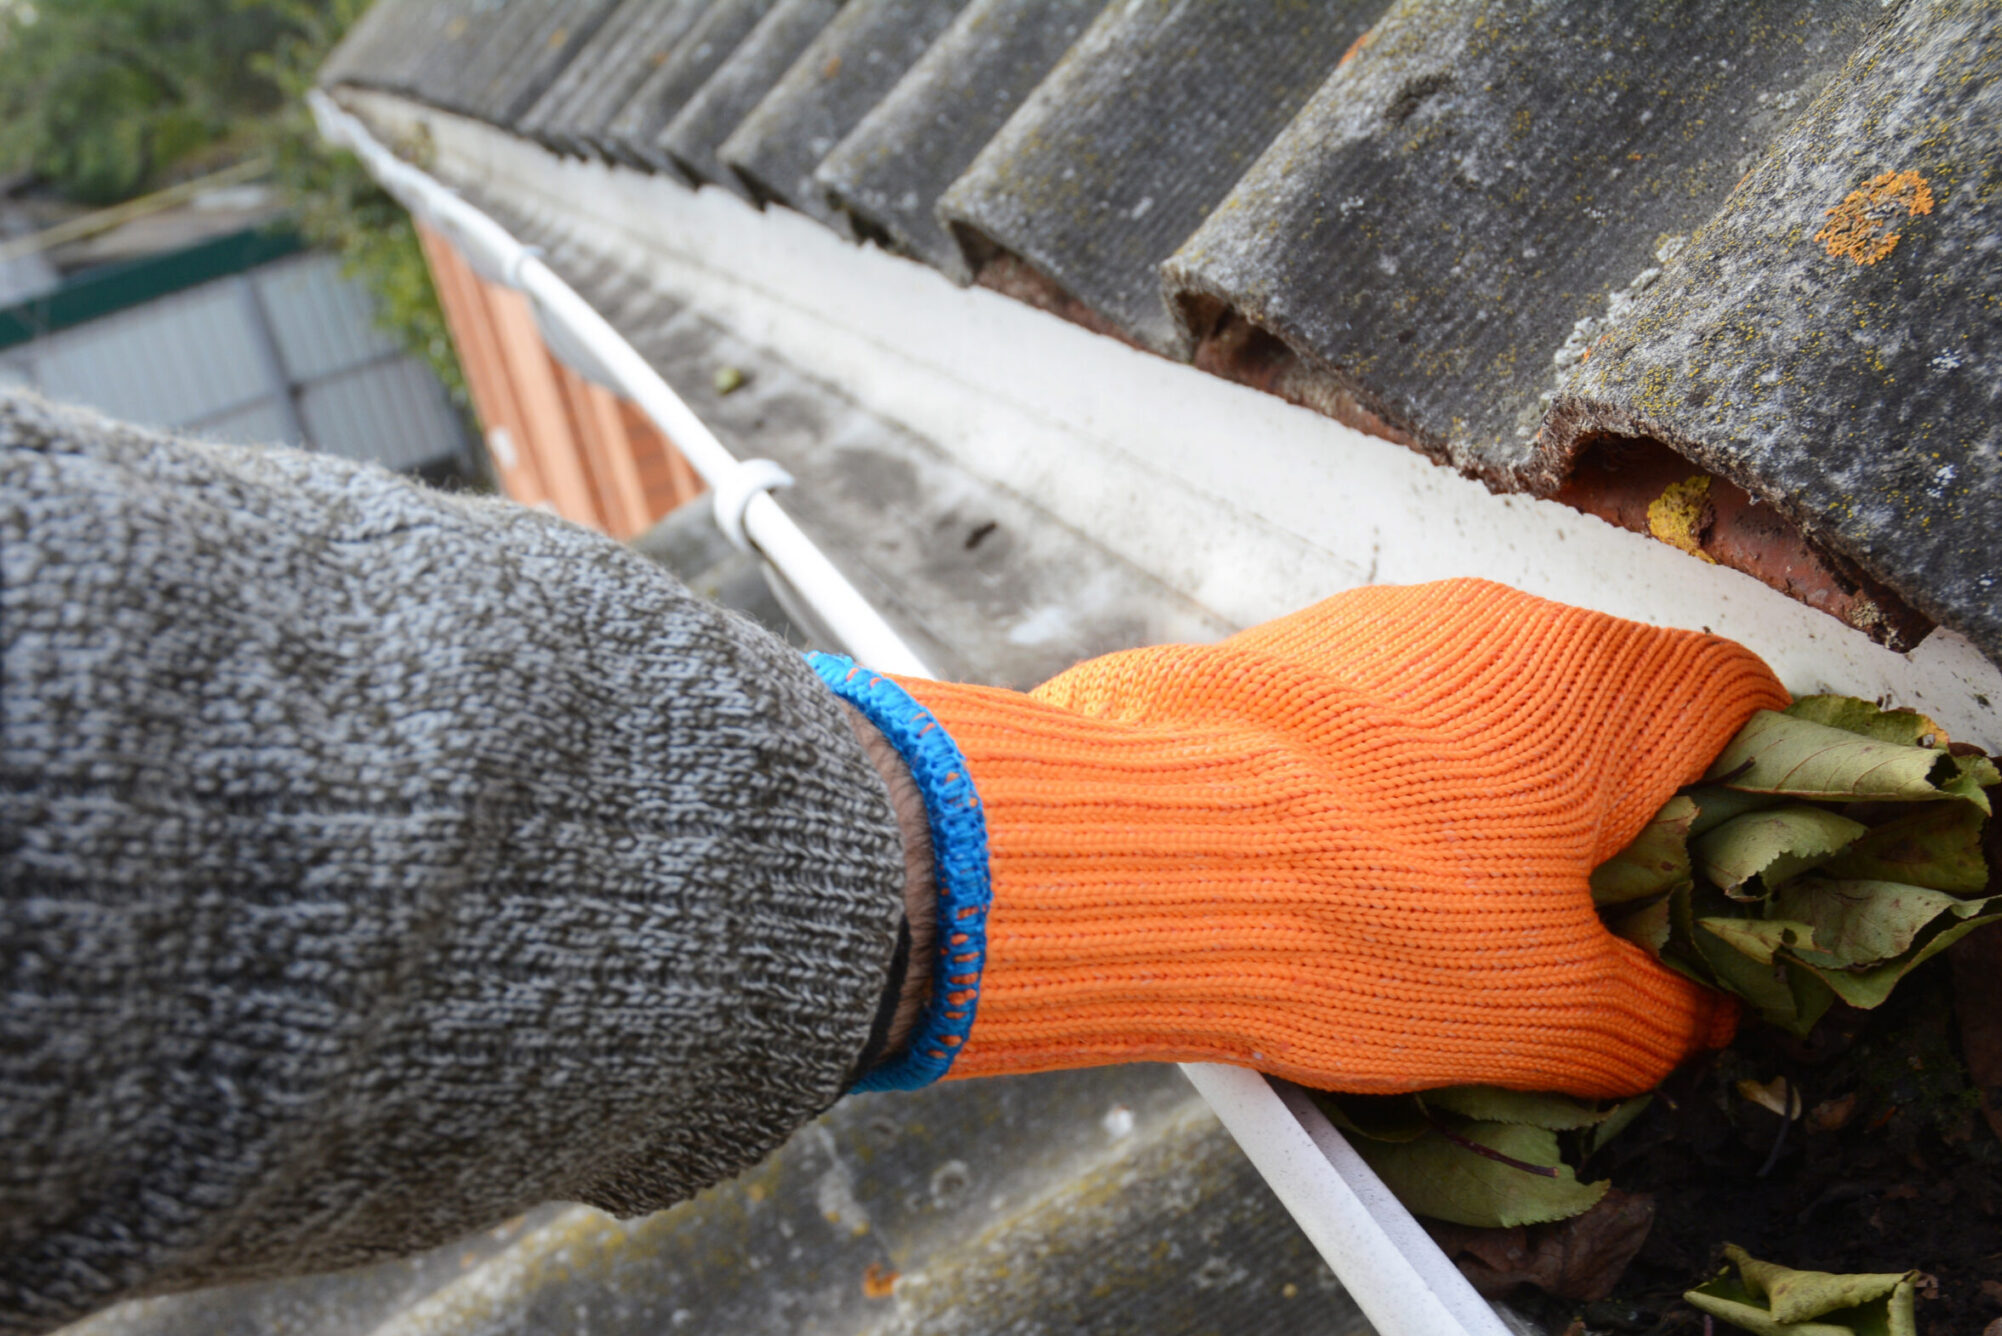 Cleaning the gutters of leaves